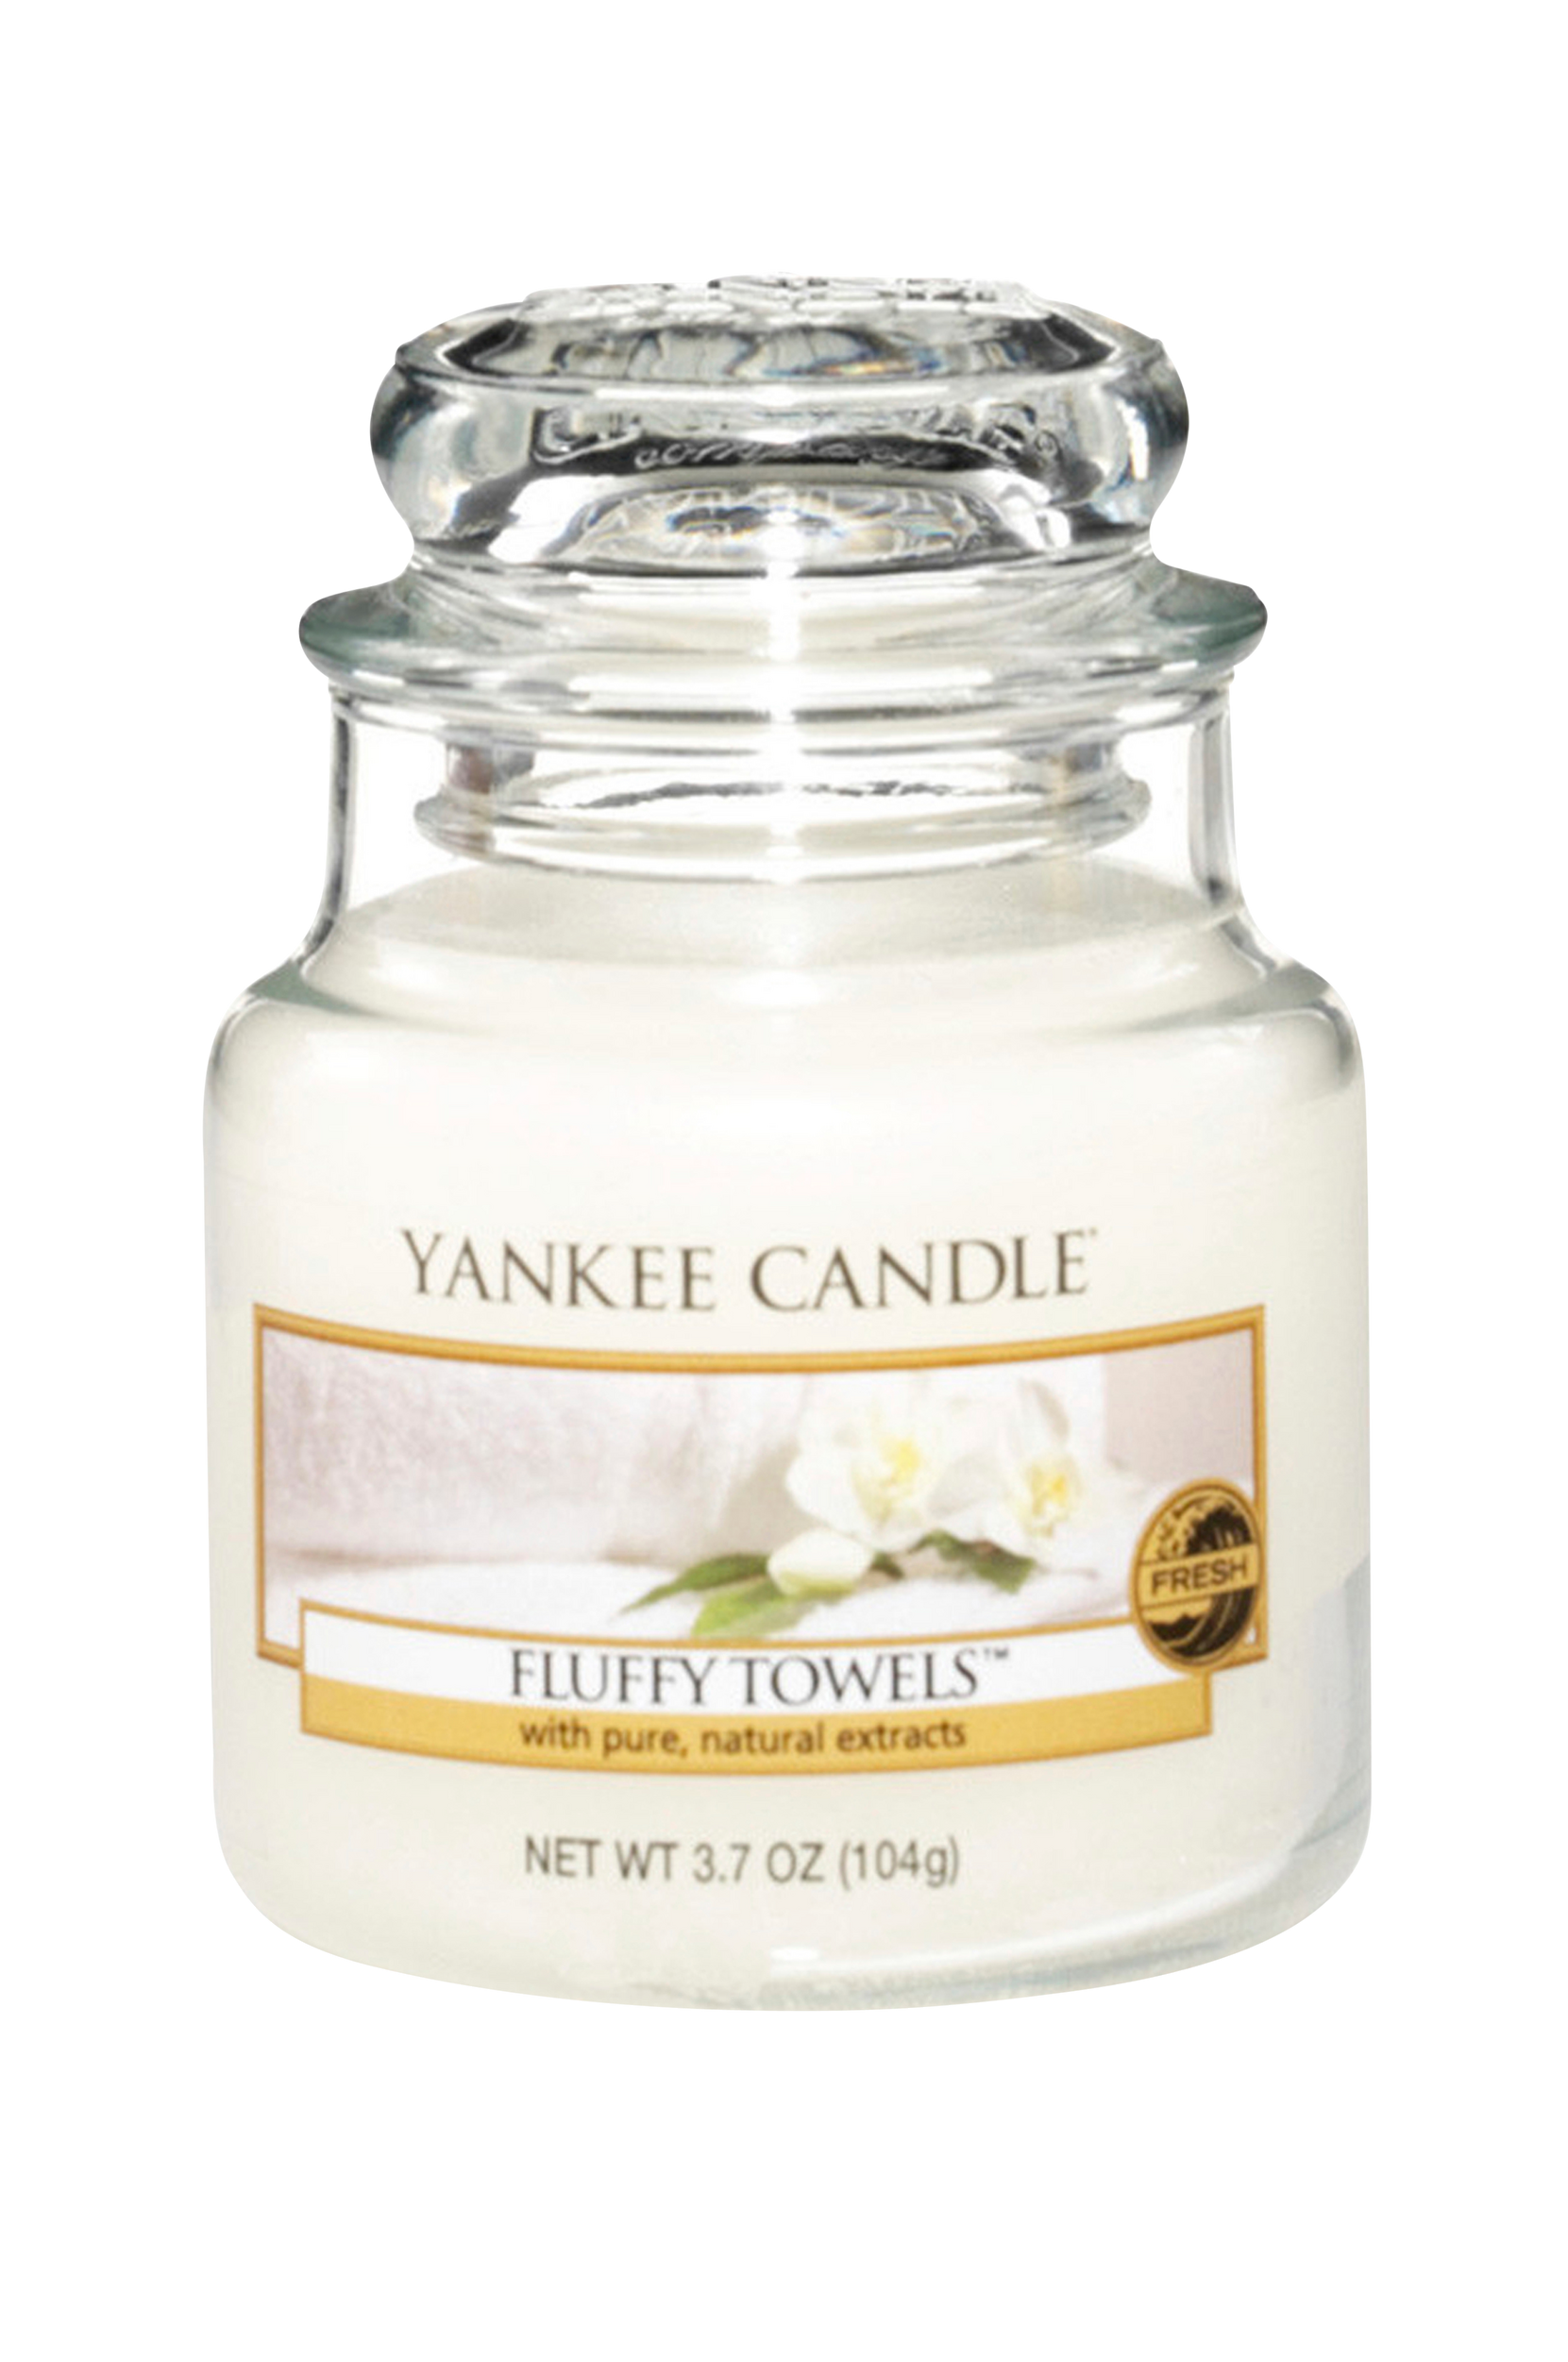 Classic Small Fluffy Towels, Yankee Candle